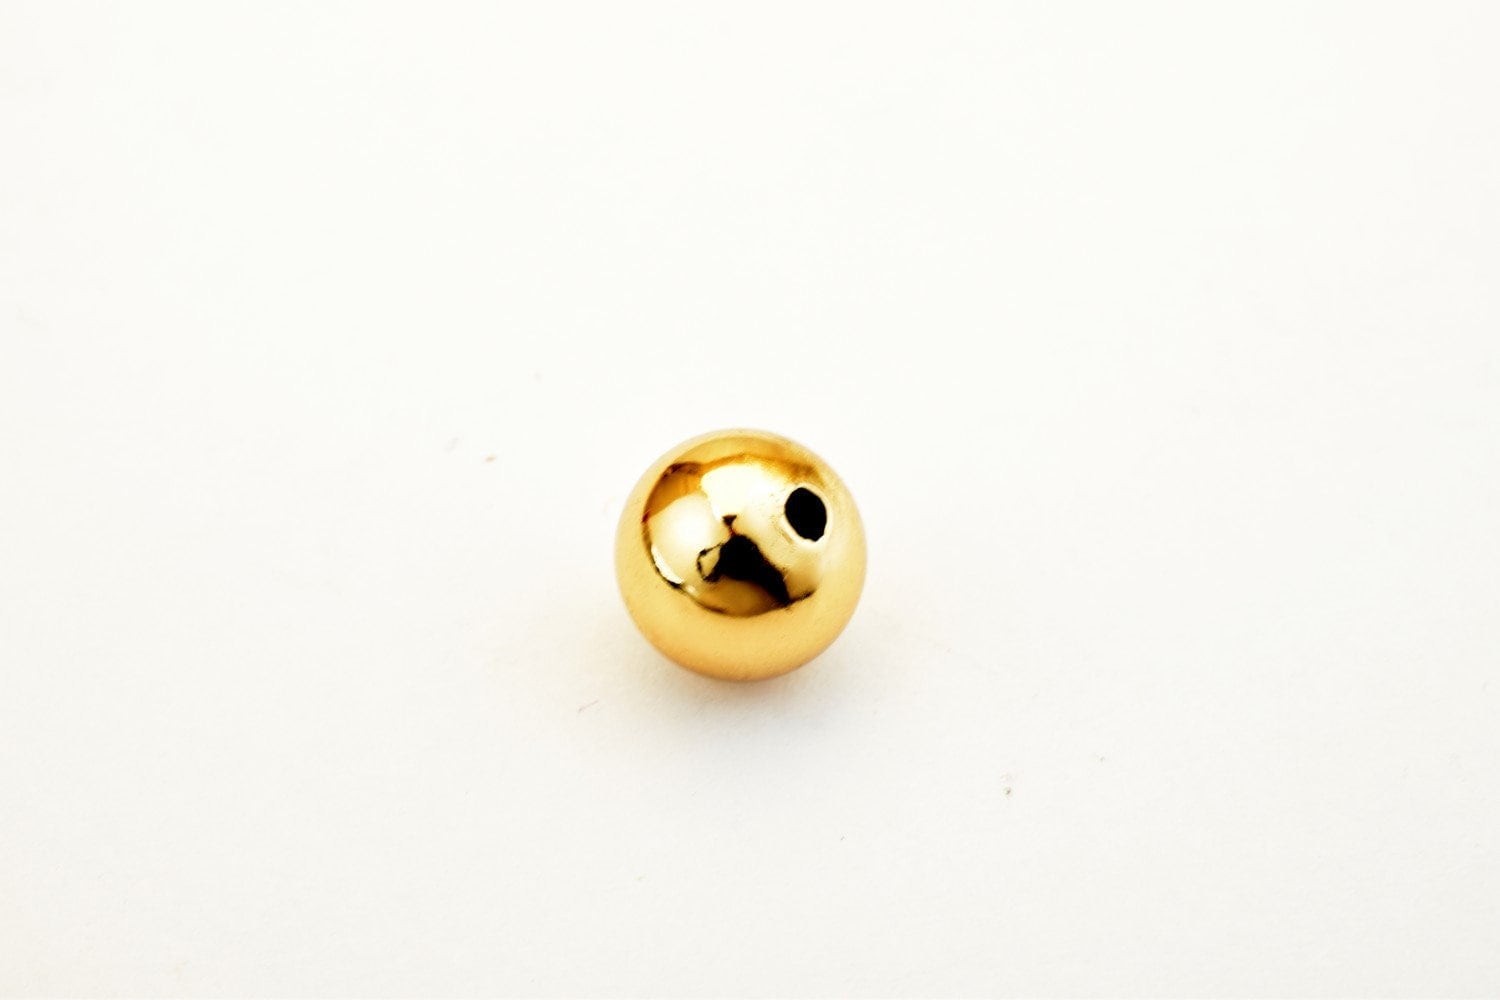 Gold filled EP plain beads seamless spacer sizes 2mm/2.5mm/3mm/4mm/5mm